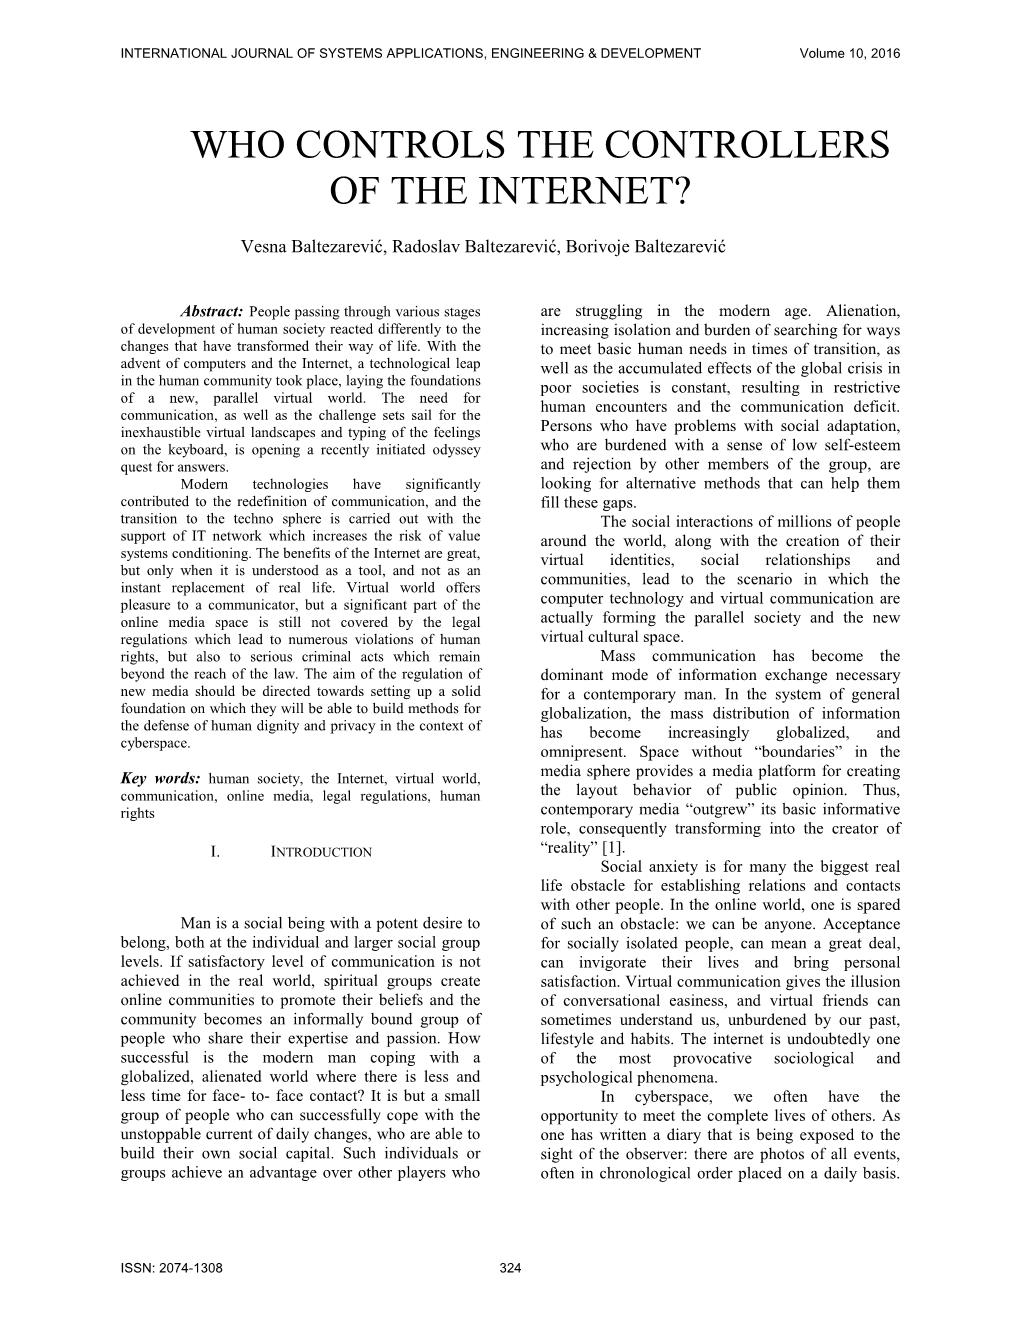 Who Controls the Controllers of the Internet?